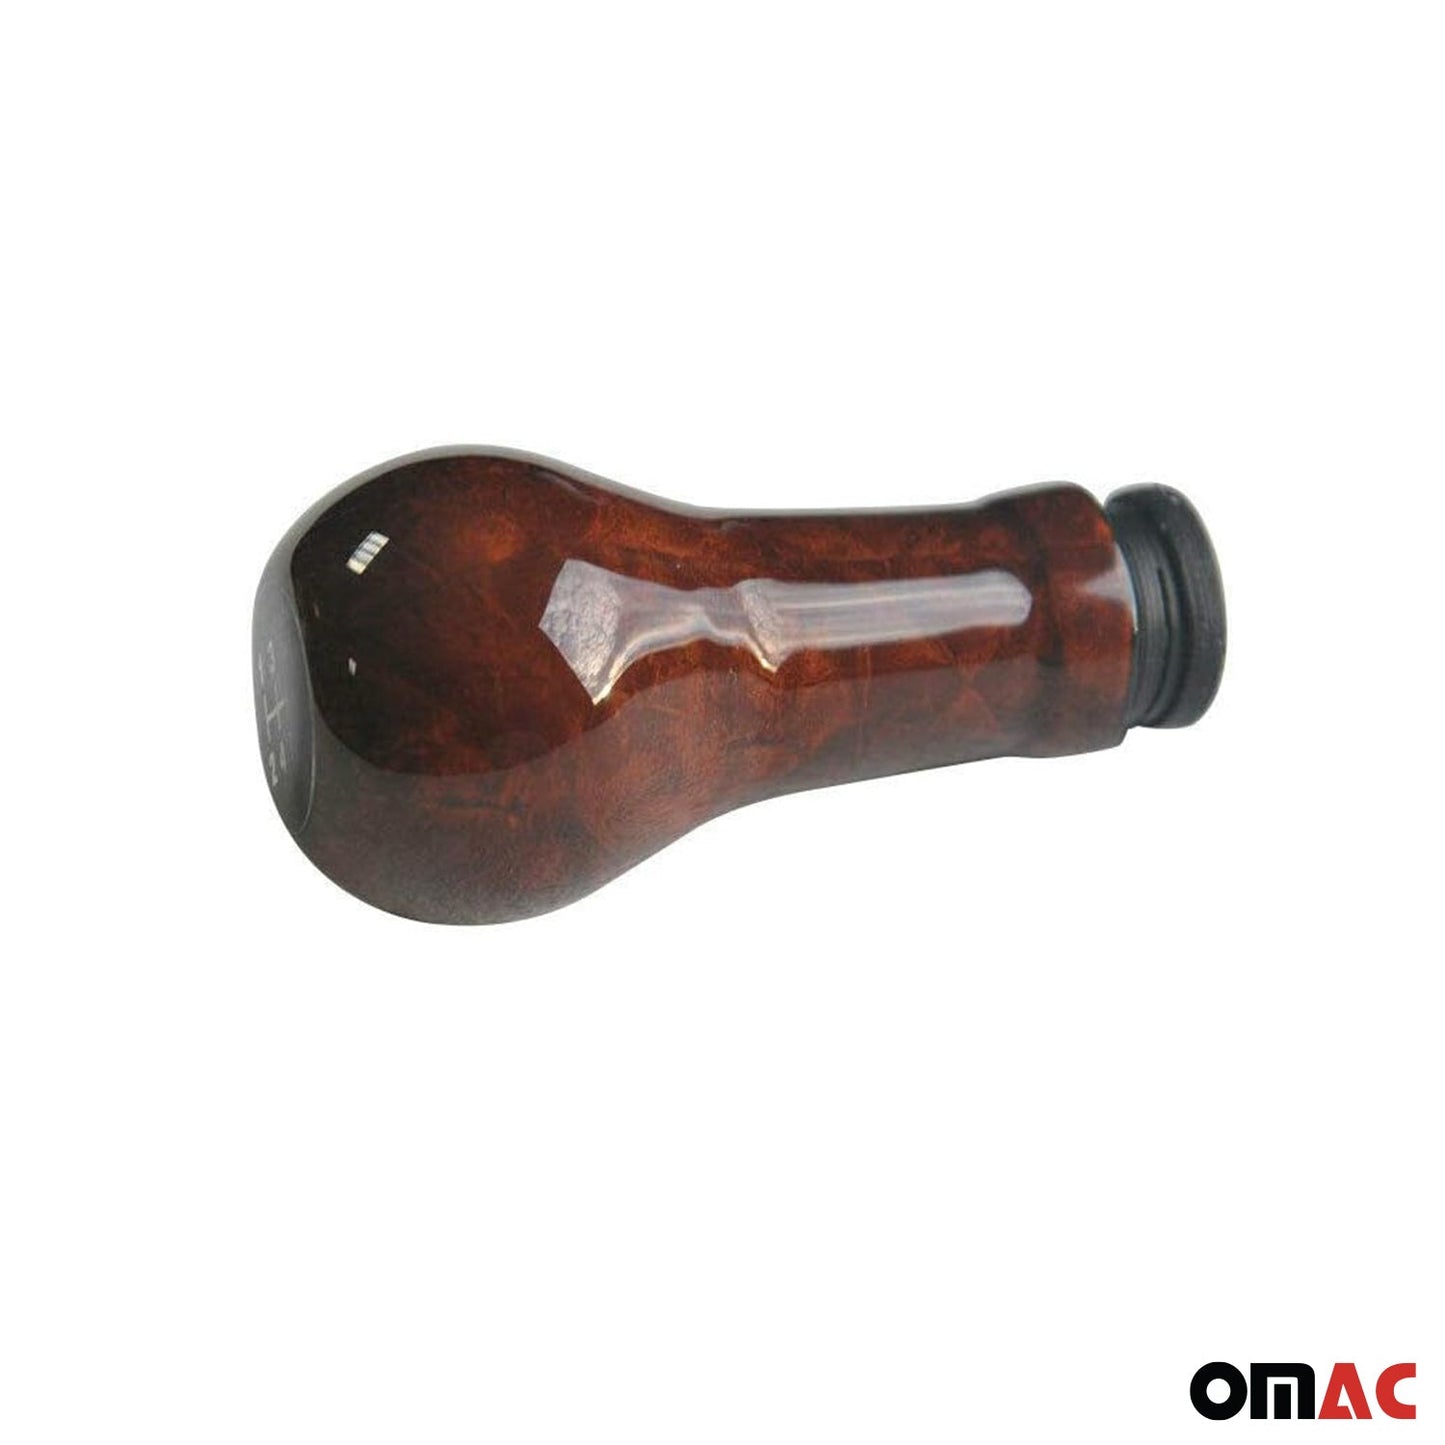 OMAC Walnut Gear Shift Knob Shifter Handle Mechanic for Ford Transit Connect 2010-13 2620501-W2